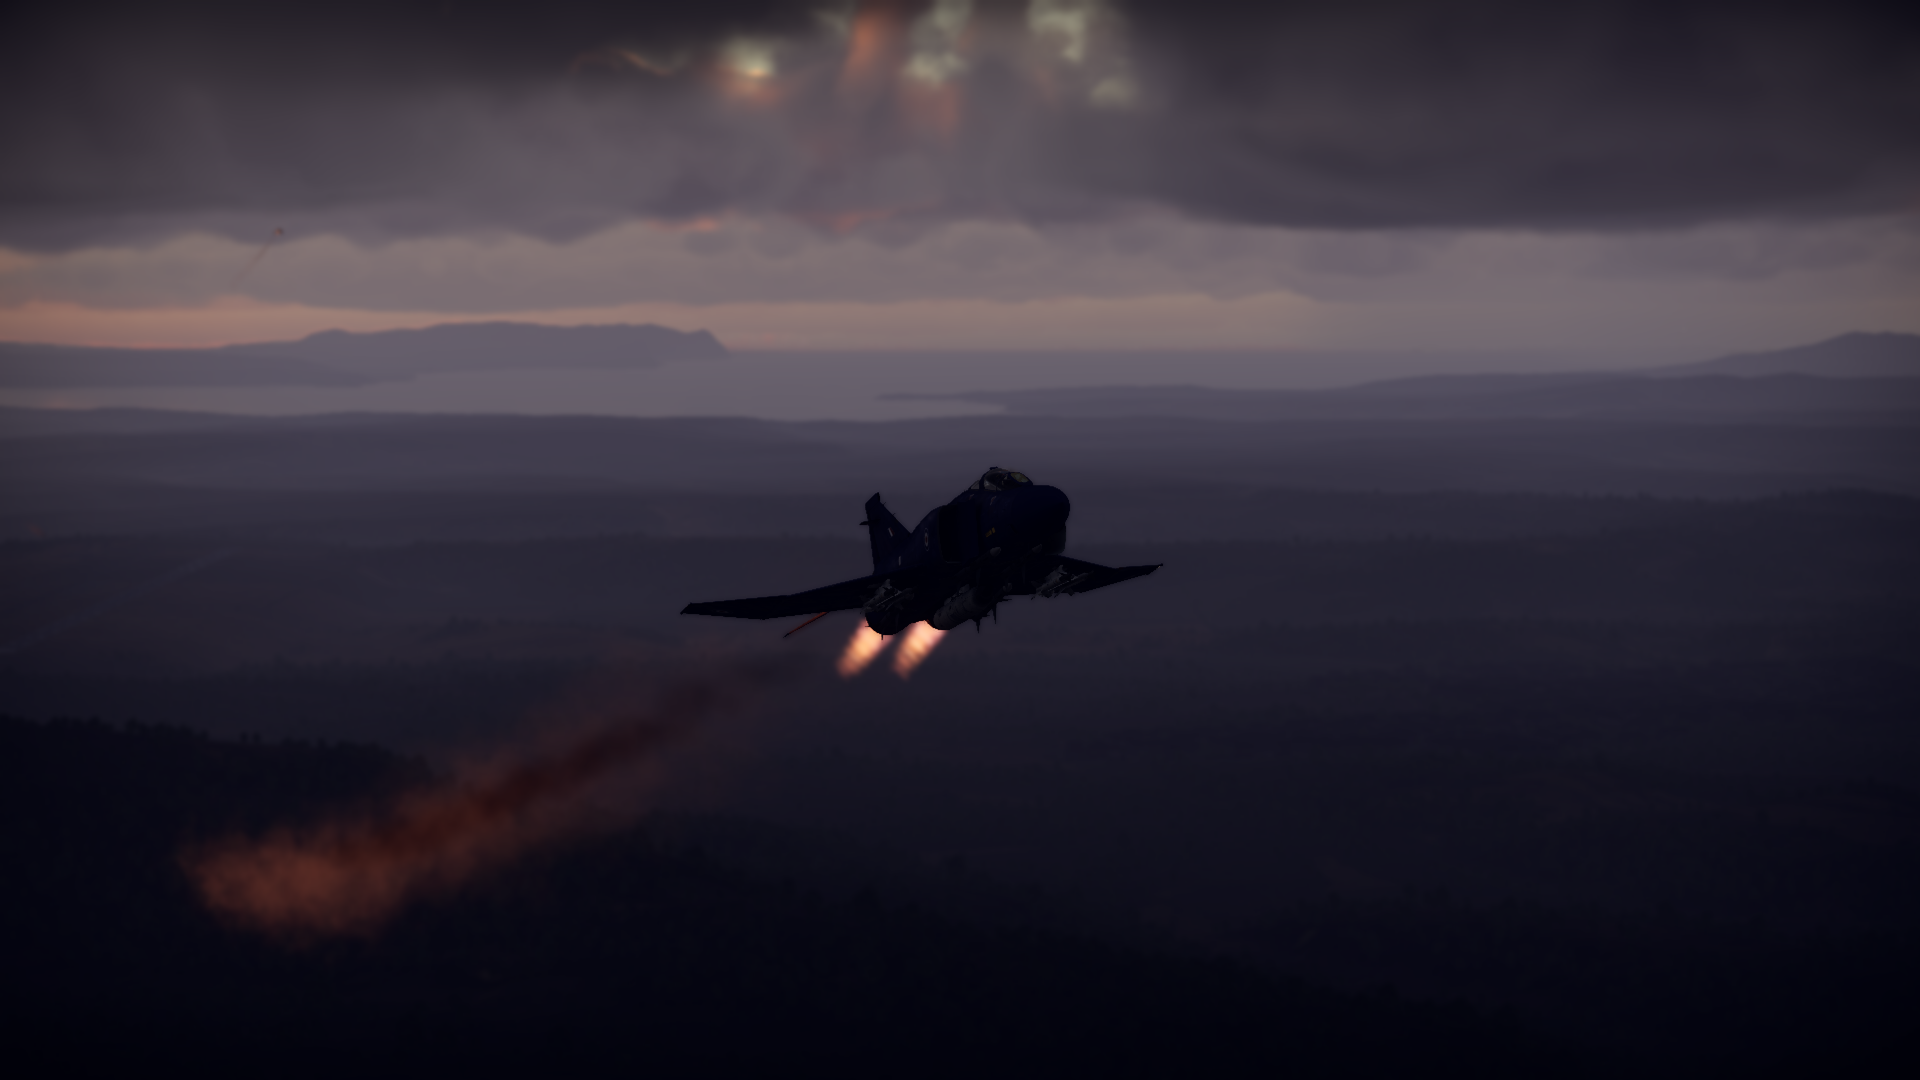 General 1920x1080 War Thunder jet fighter sunset military aircraft military McDonnell Douglas F-4 Phantom II PC gaming screen shot vehicle military vehicle aircraft